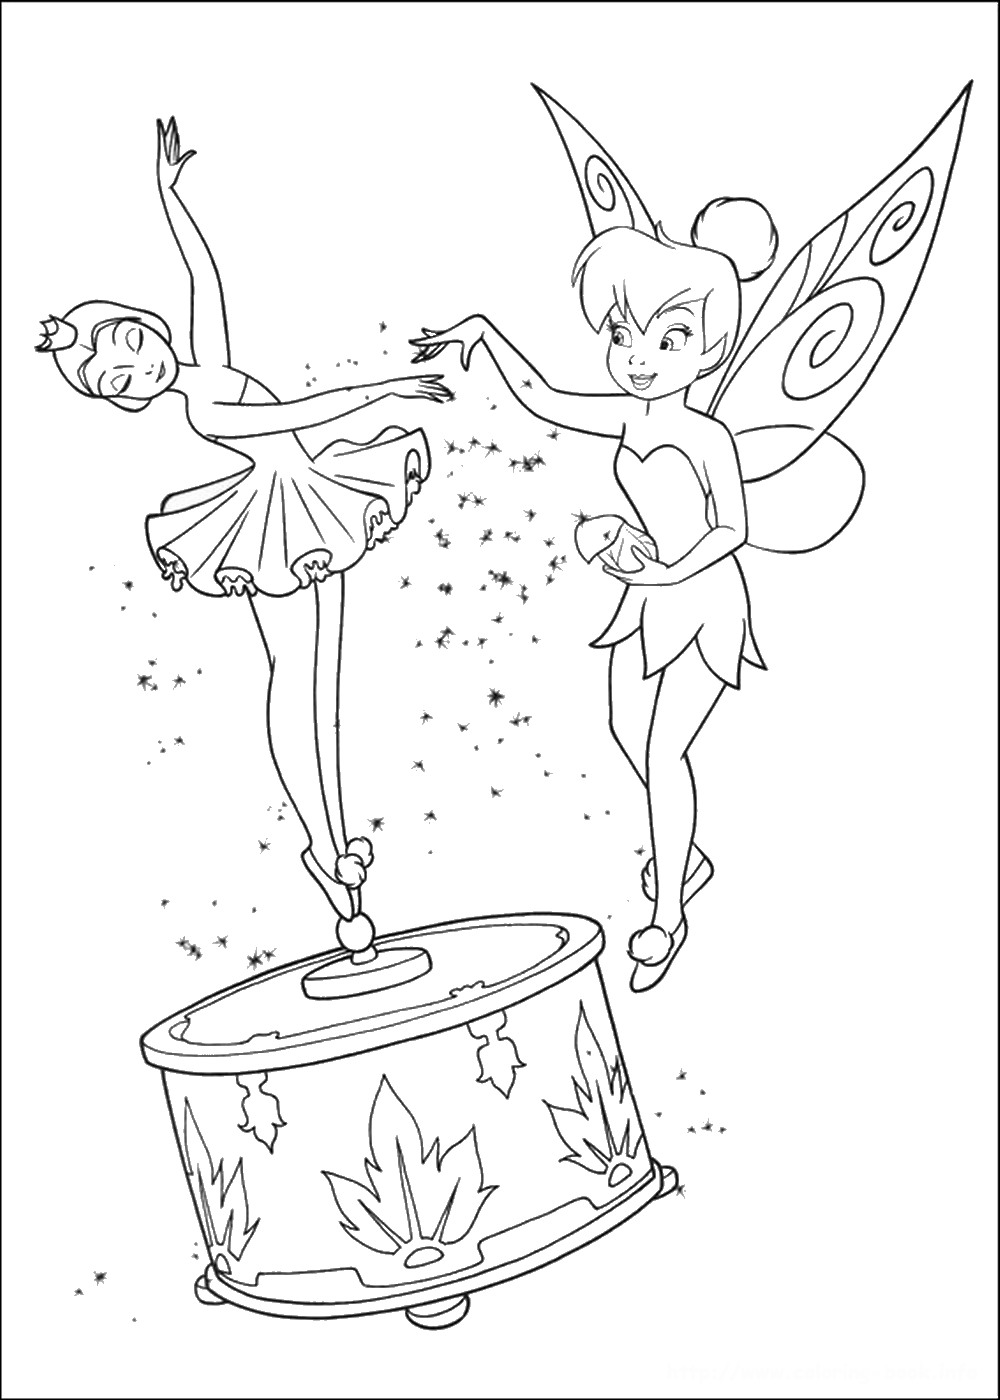 get-tinkerbell-coloring-pages-free-pictures-color-pages-collection